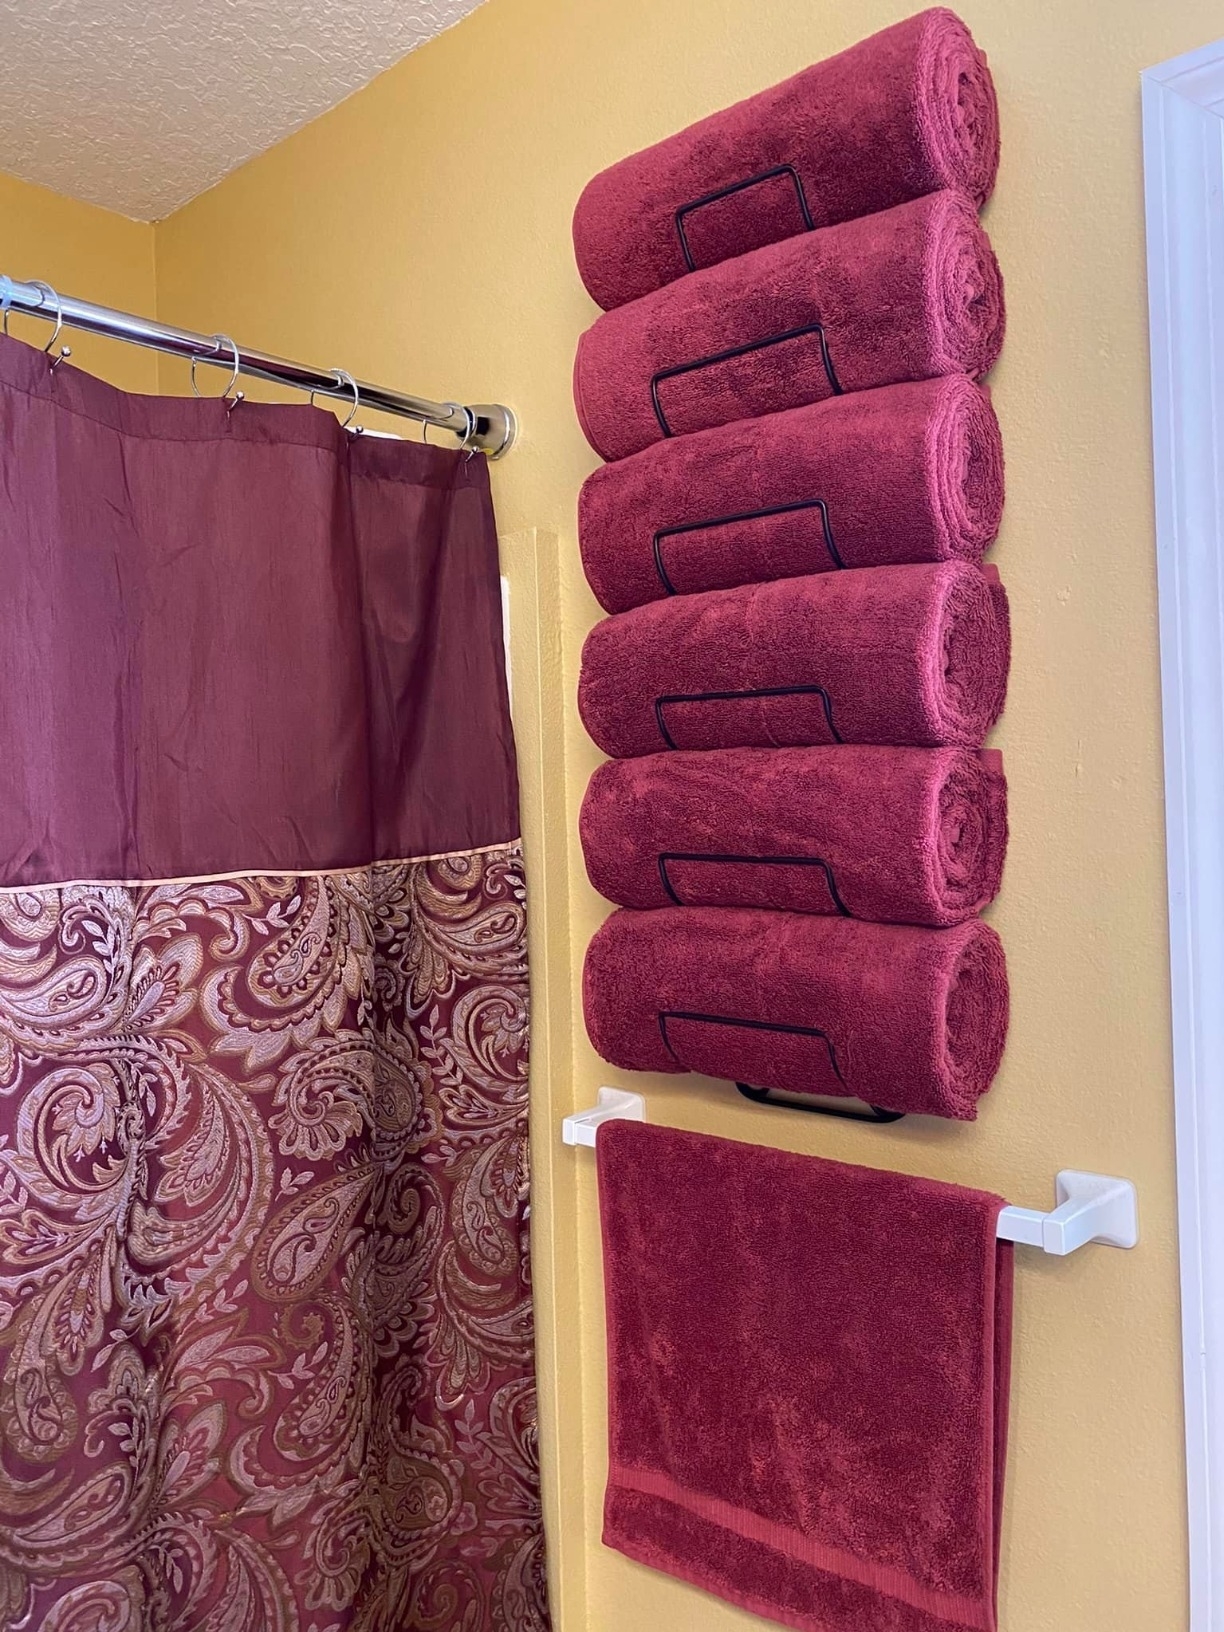 Five plush red towels neatly rolled and stacked on a wall-mounted shelf in a bathroom